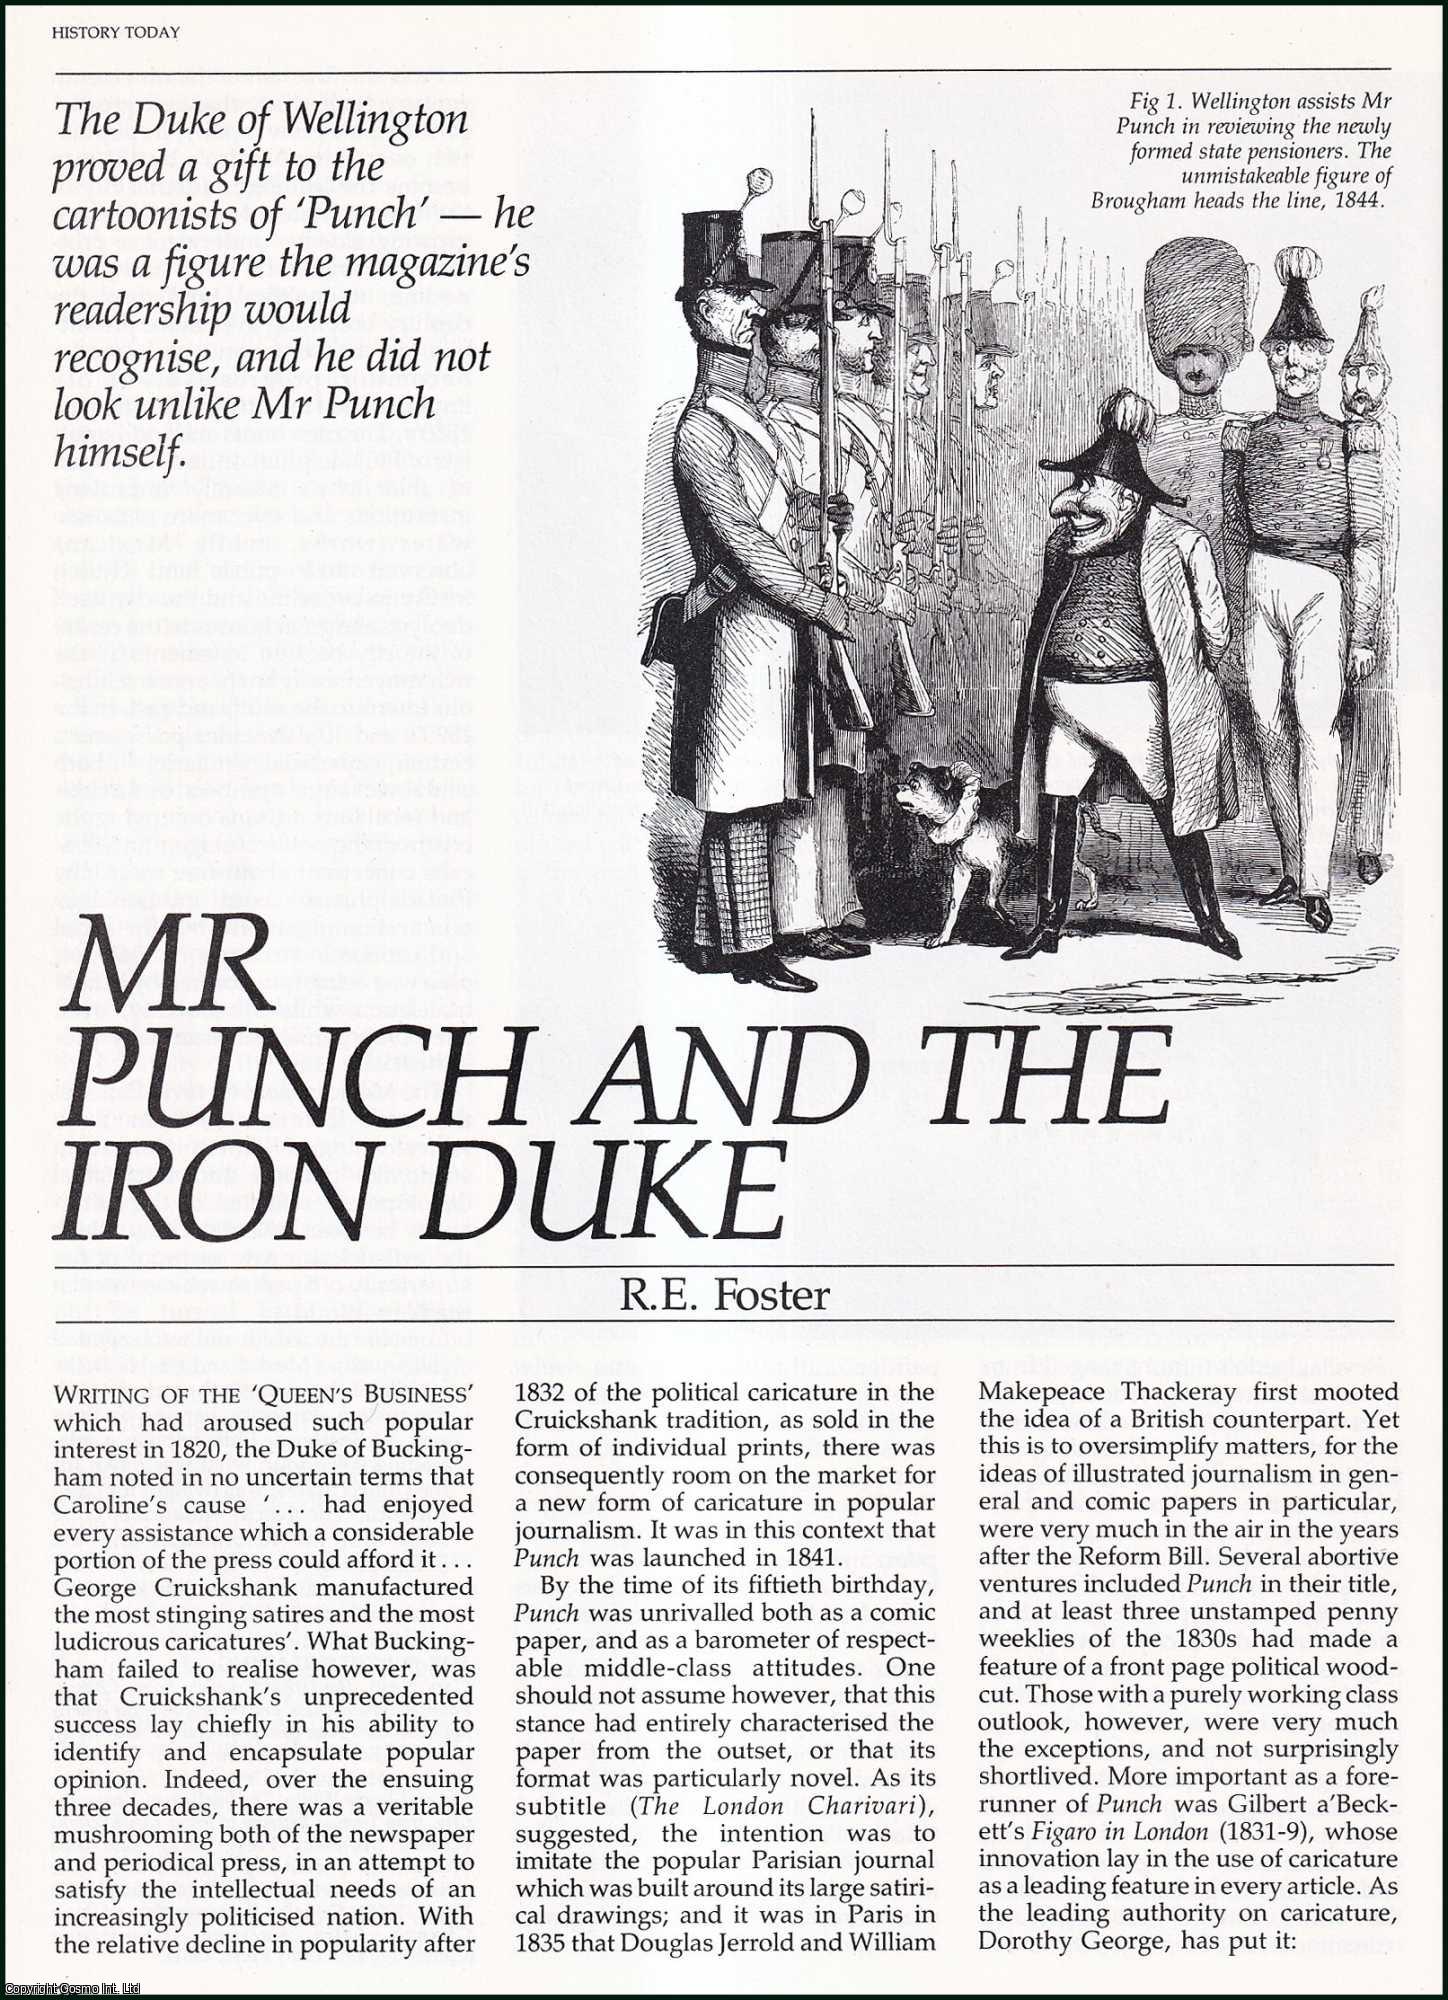 R.E. Foster - Mr Punch and the Iron Duke; how the Duke of Wellington proved a Gift to the Cartoonists of Punch. An original article from History Today, 1984.